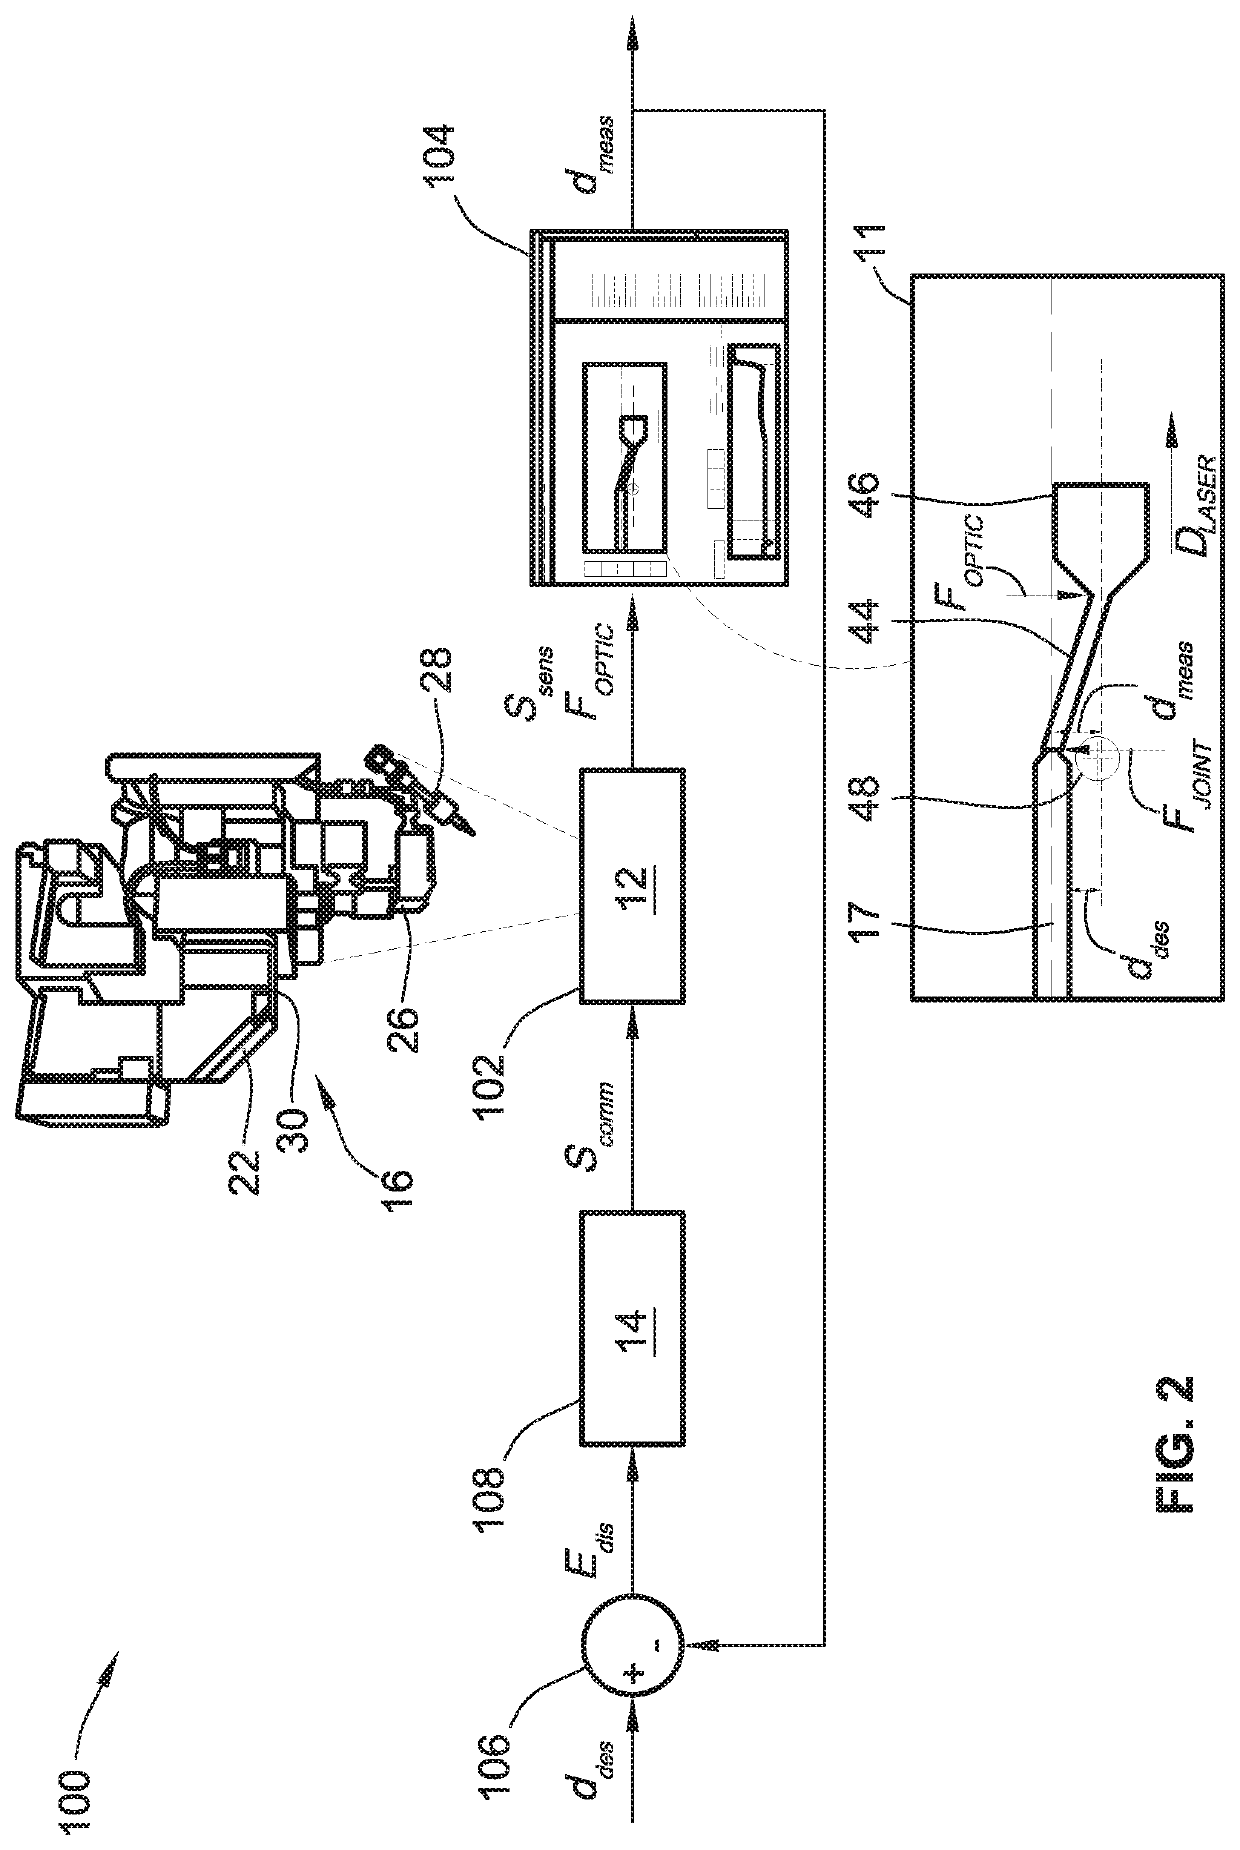 Intelligent non-autogenous metalworking systems and control logic with automated wire-to-beam alignment